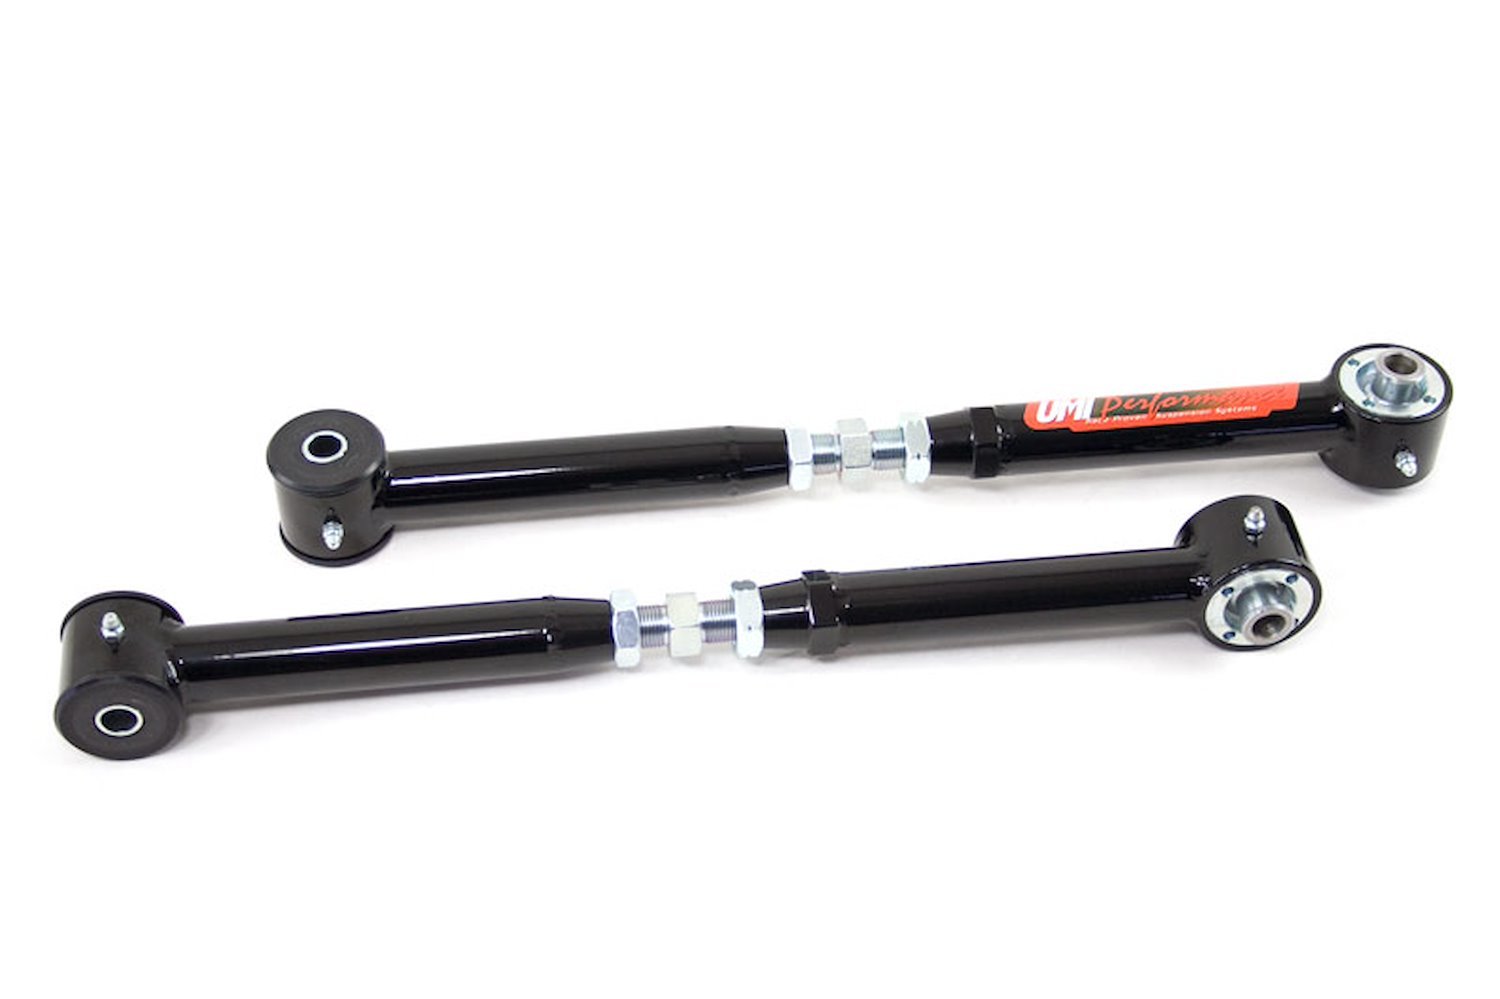 UMI s on car adjustable lower control arms for the 2005 and up Ford Mustang utilize our Roto-Joint t